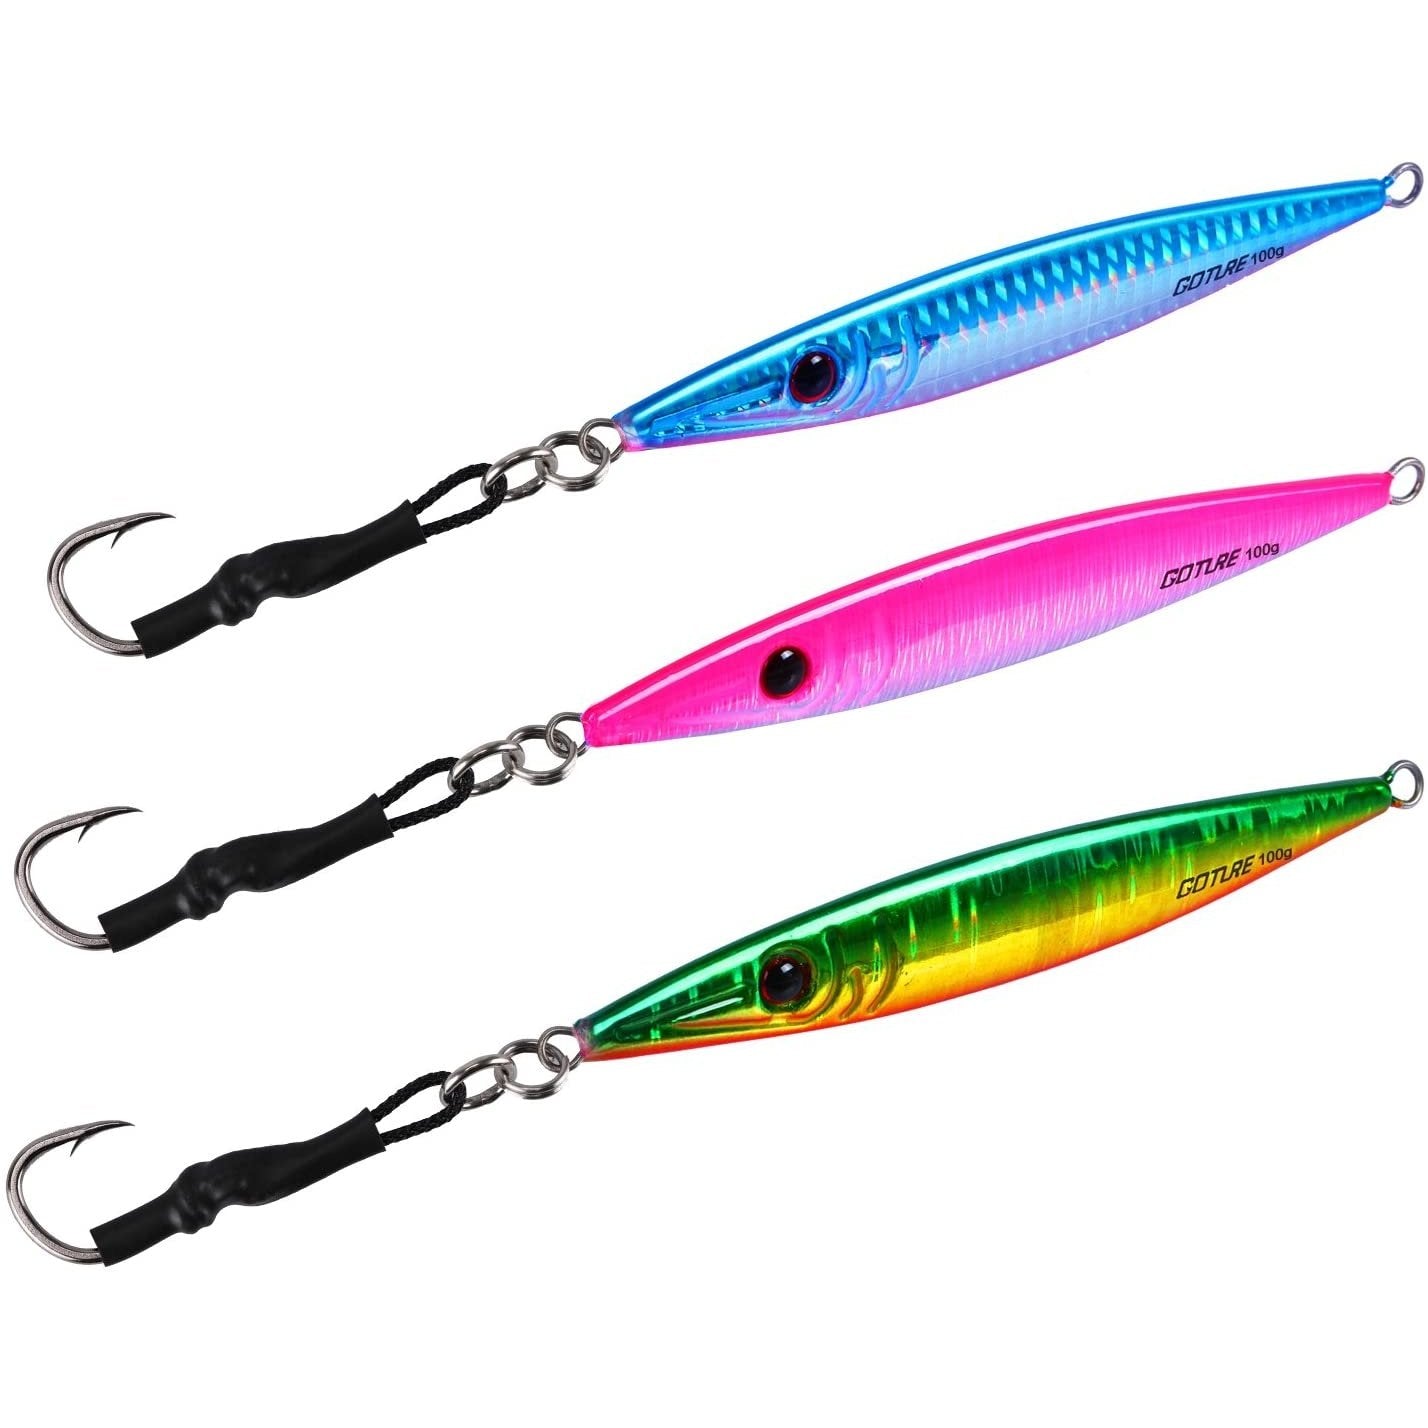 Buy Goture Fishing Jigs Saltwater 60g-200g with Assist Hook, Glow